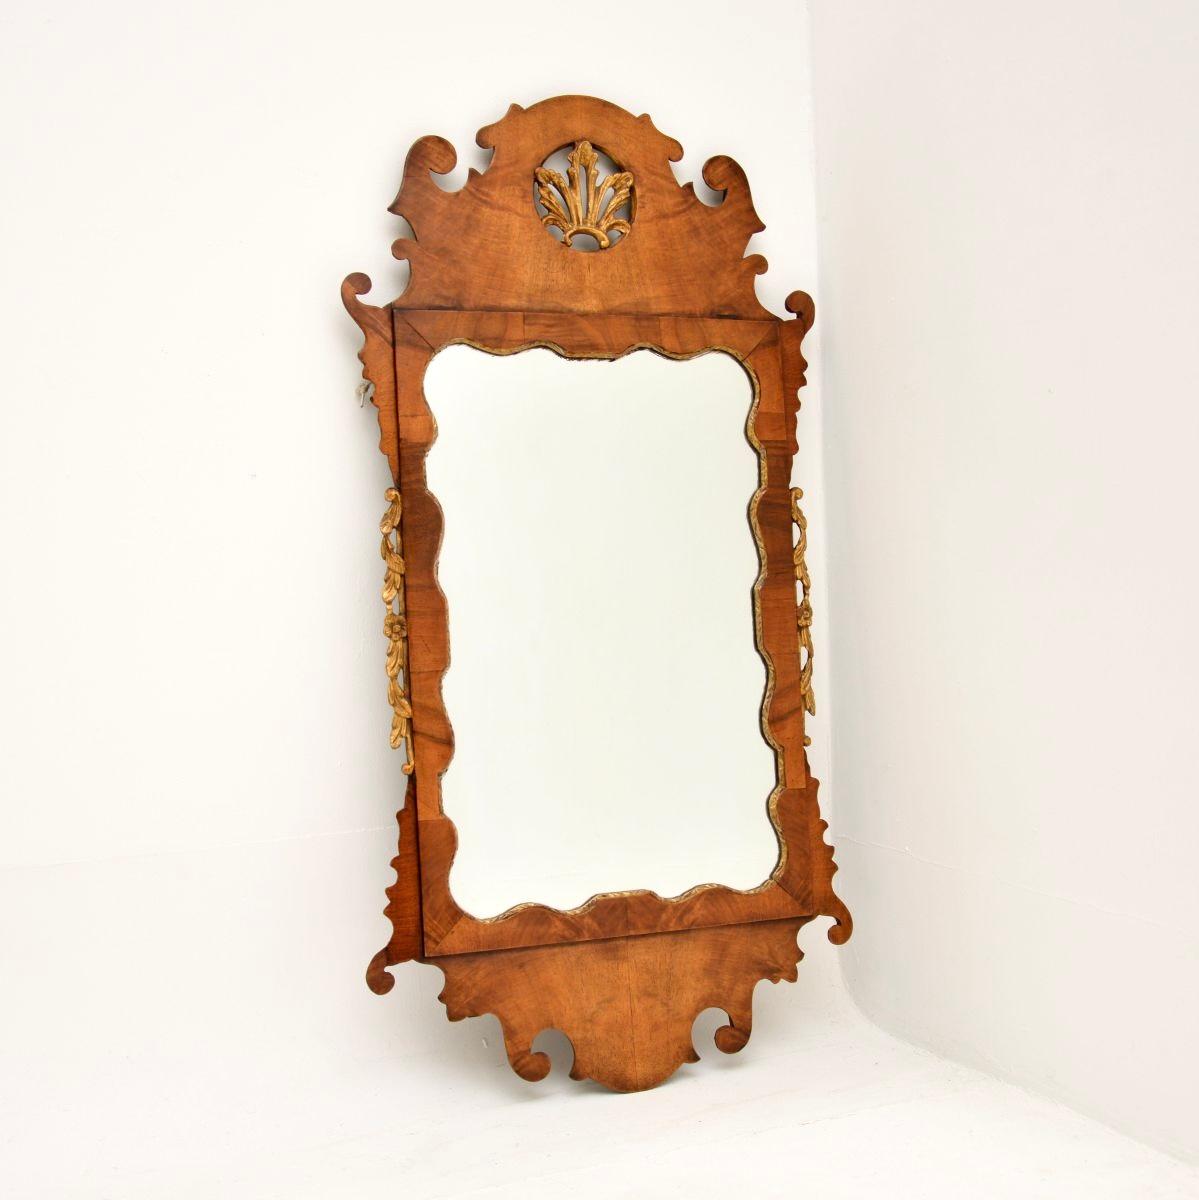 An absolutely stunning antique George II period walnut mirror. This was made in England, it has a carved date and location on the back reading: London, 1741.

It is of superb quality and is beautifully designed, with a sleek and refined look. The